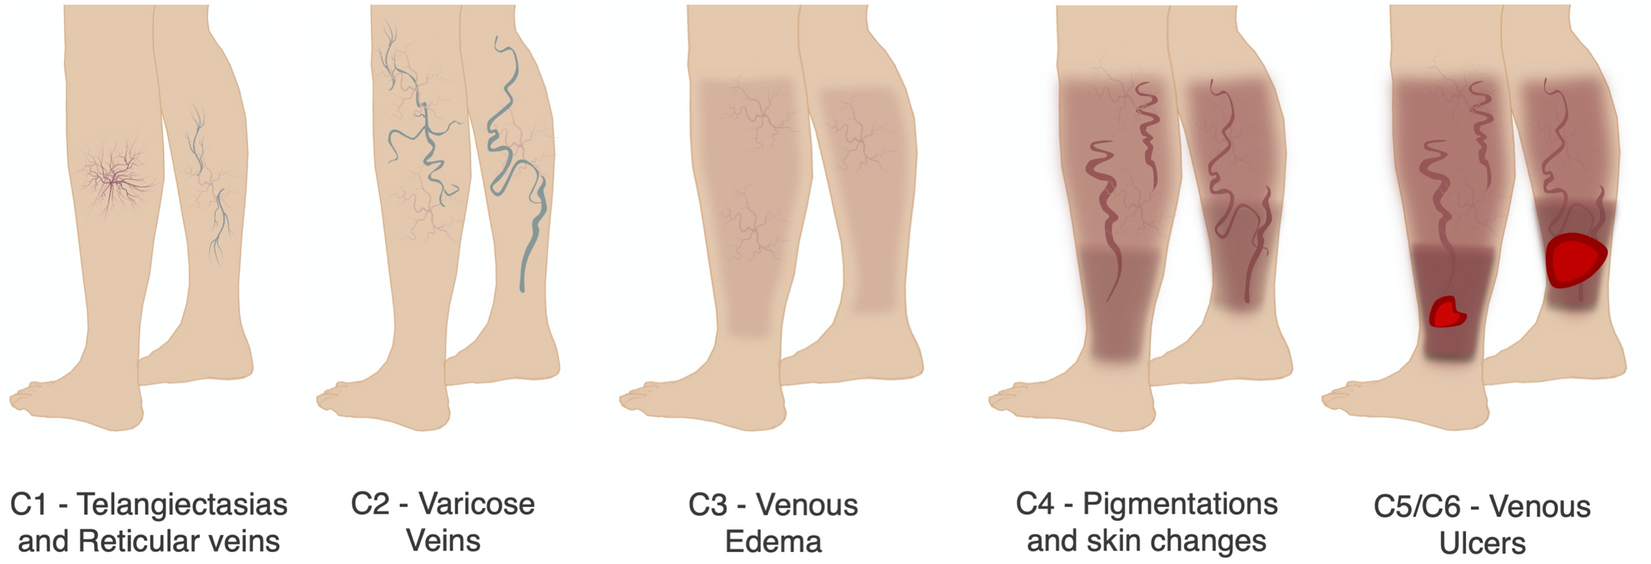 Case Study: 42-year-old Woman with Large Varicose Veins